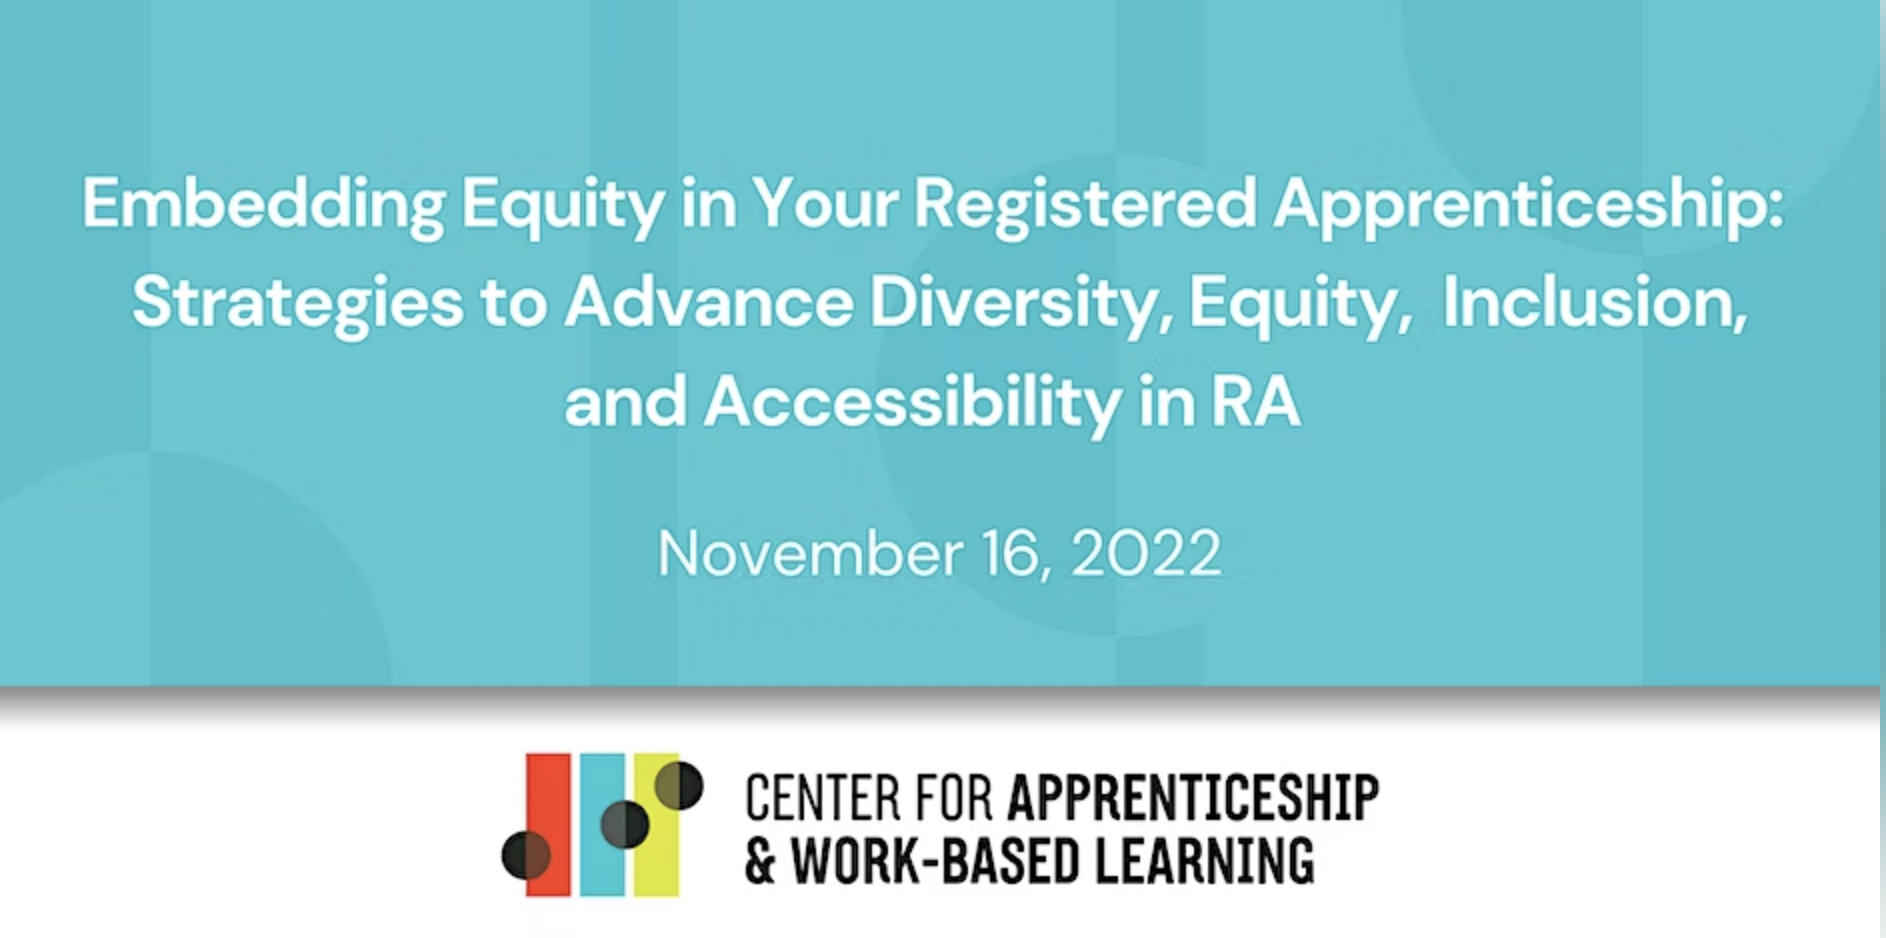 Embedding Equity in Your Registered Apprenticeship: Strategies to Advance Diversity, Equity, Inclusion, and Accessibility in RA